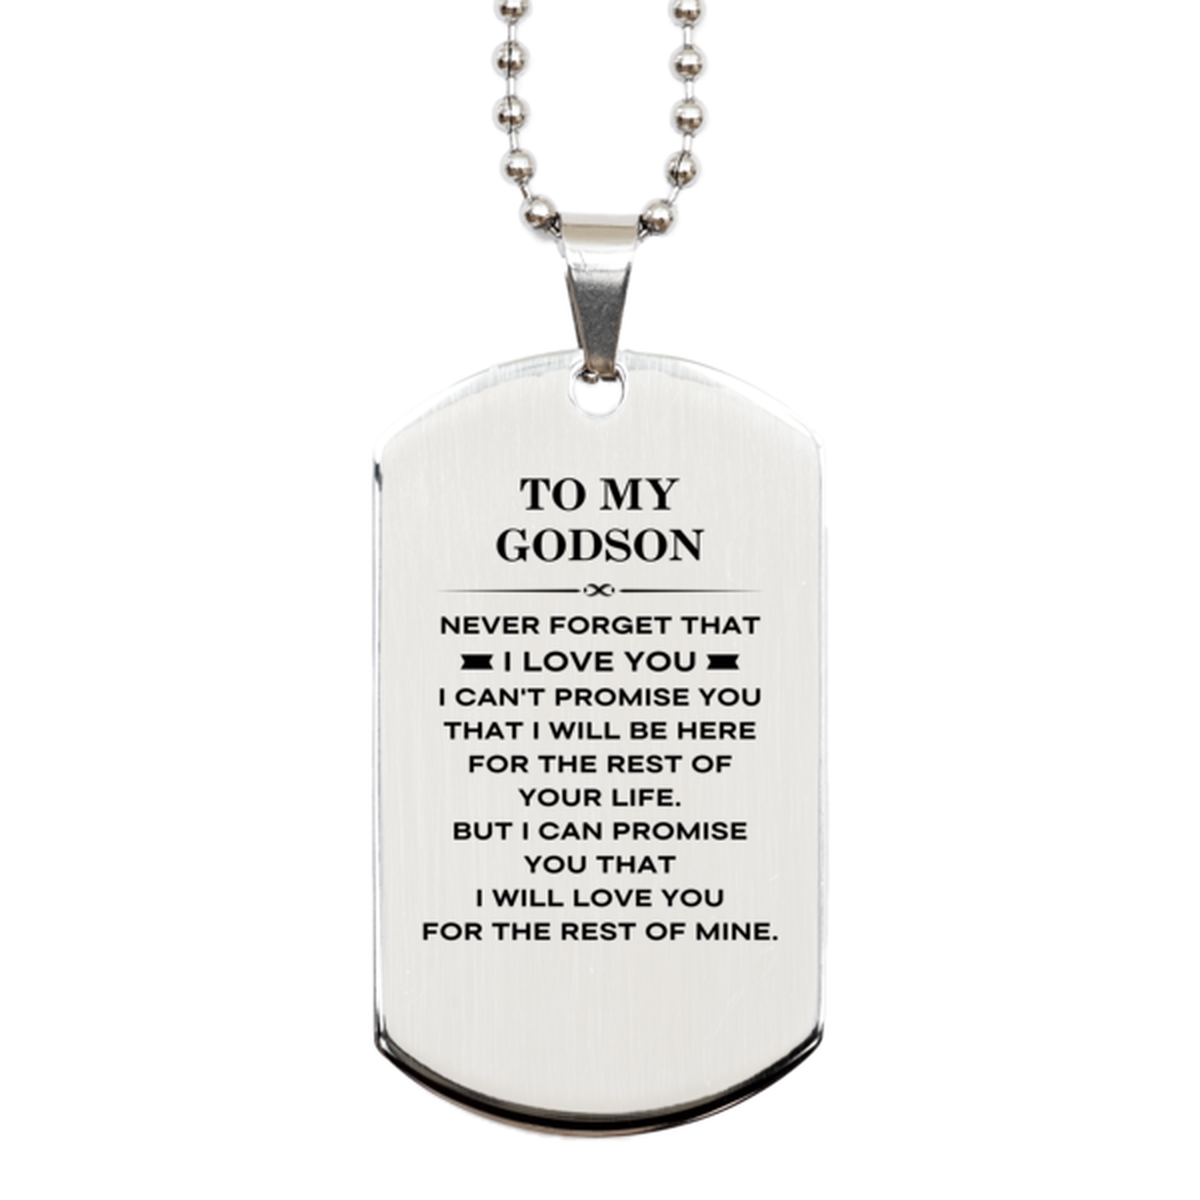 To My Godson Gifts, I will love you for the rest of mine, Love Godson Dog Tag Necklace, Birthday Christmas Unique Silver Dog Tag For Godson